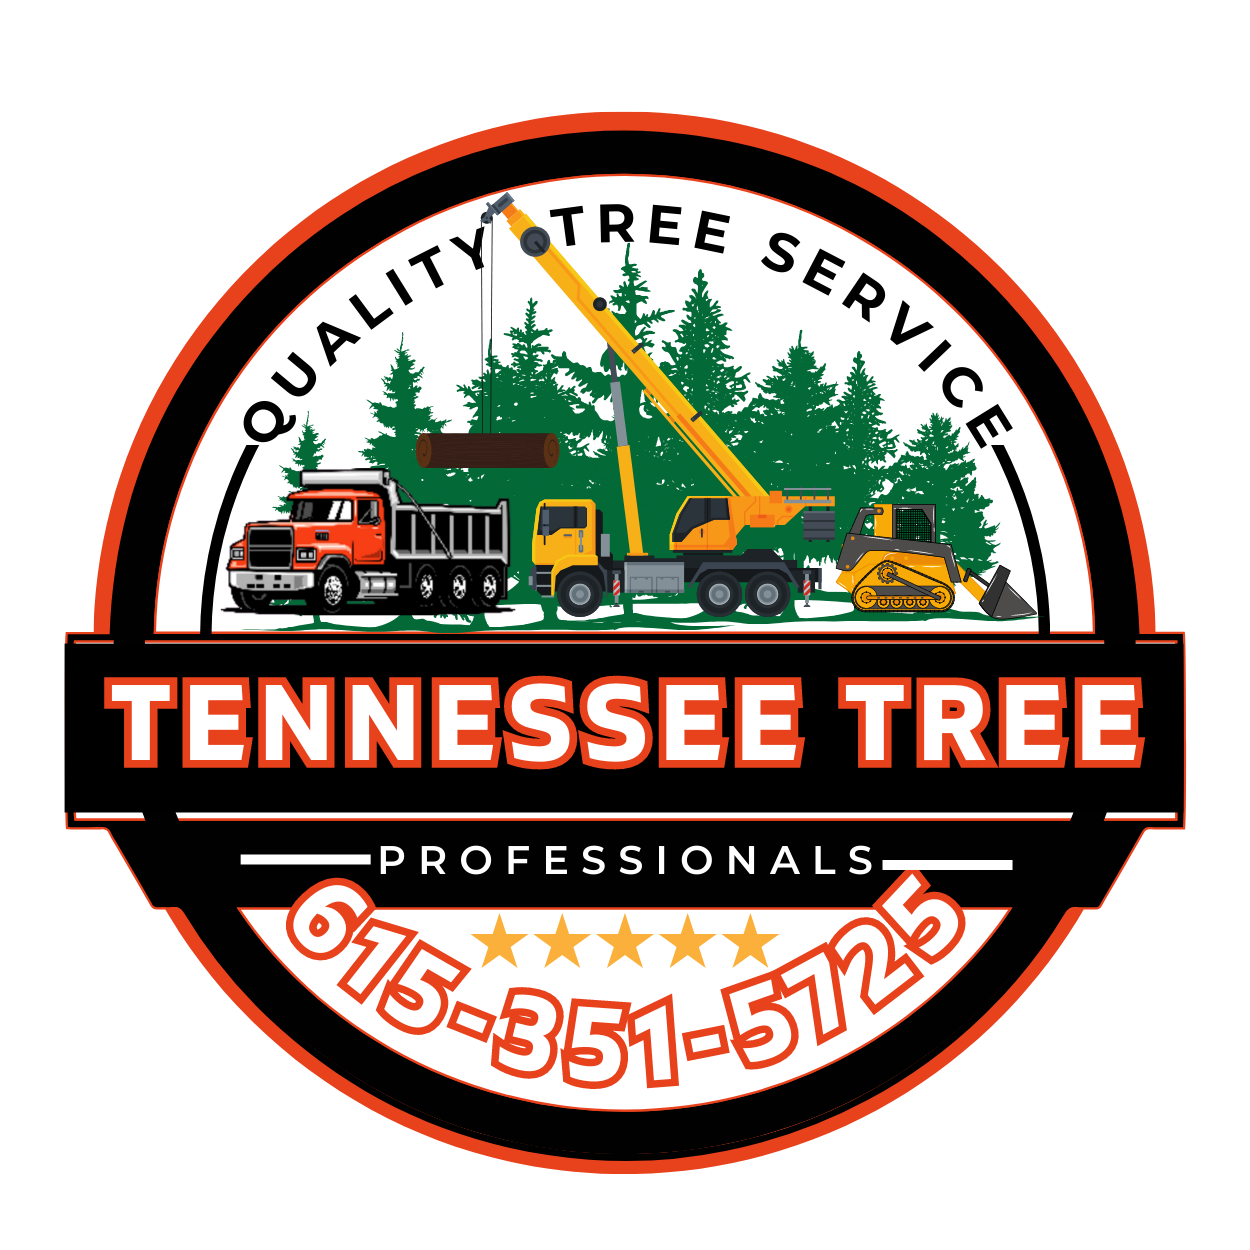 TENNESSEE TREE PROFESSIONALS